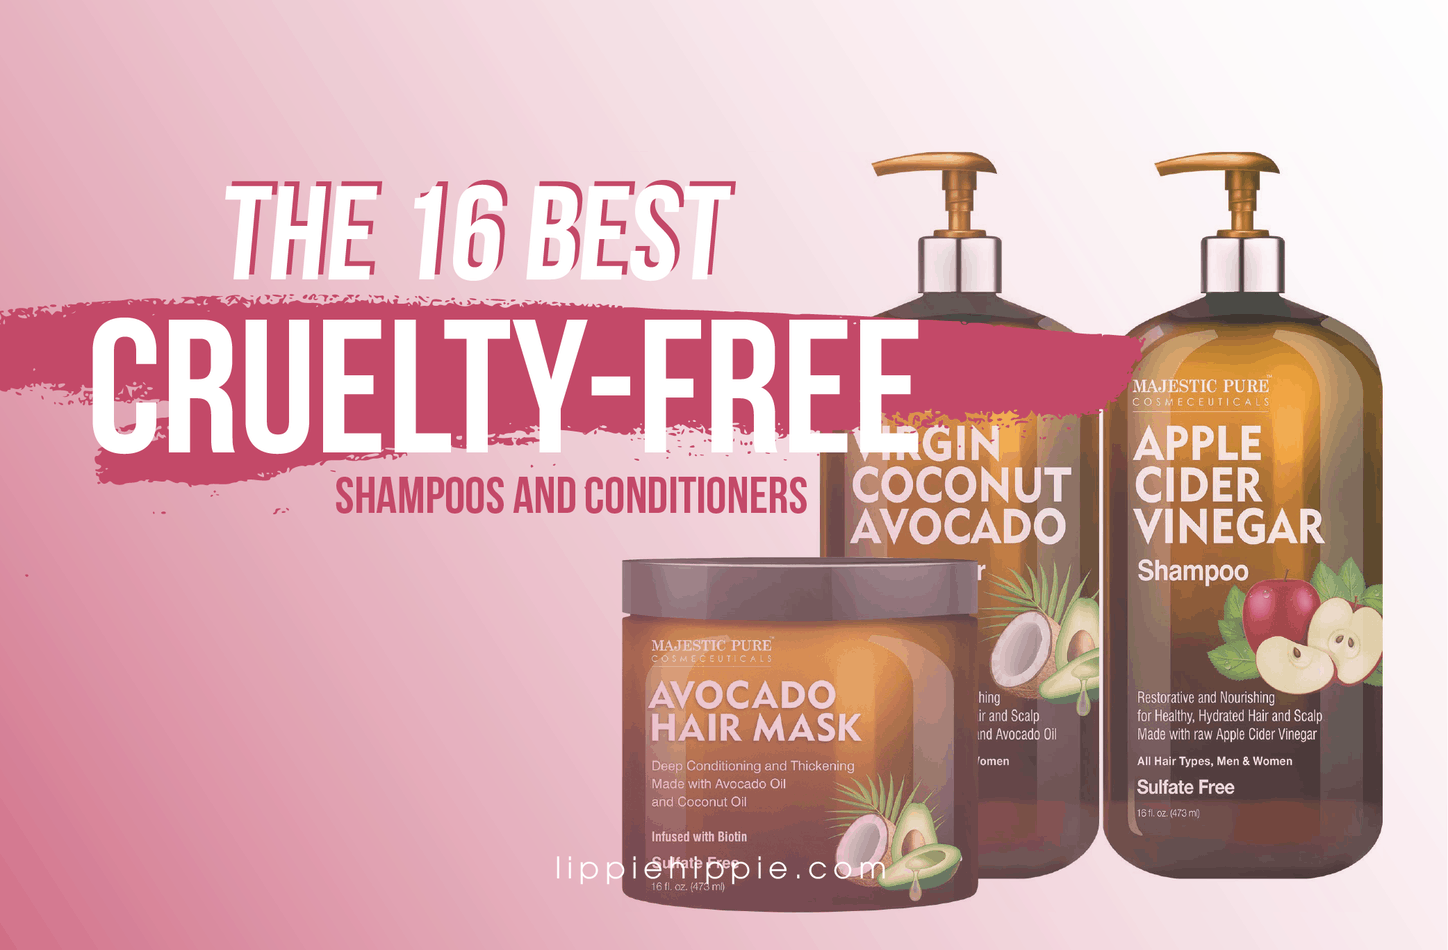 Cruelty-Free Shampoos and Conditioners